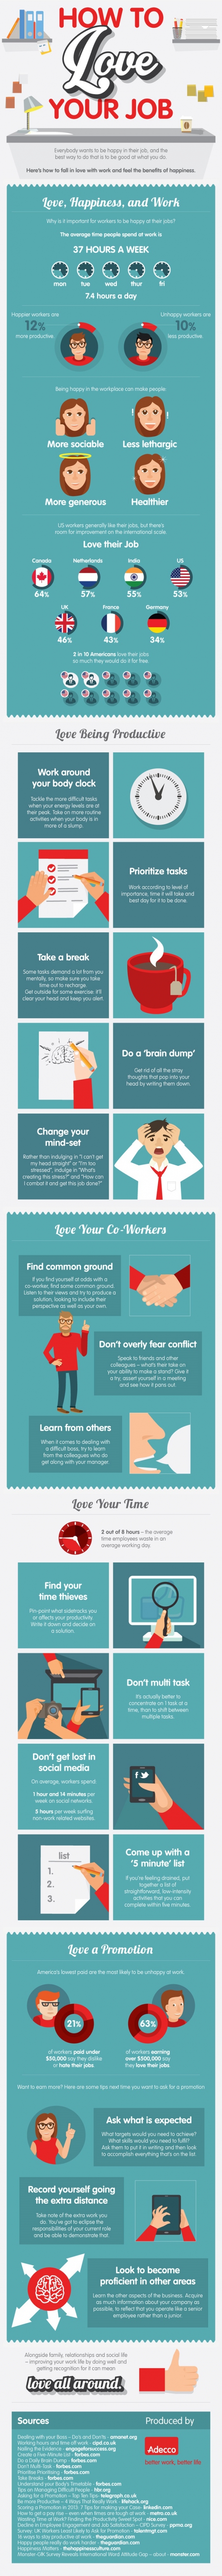 how-to-love-your-job-infographic